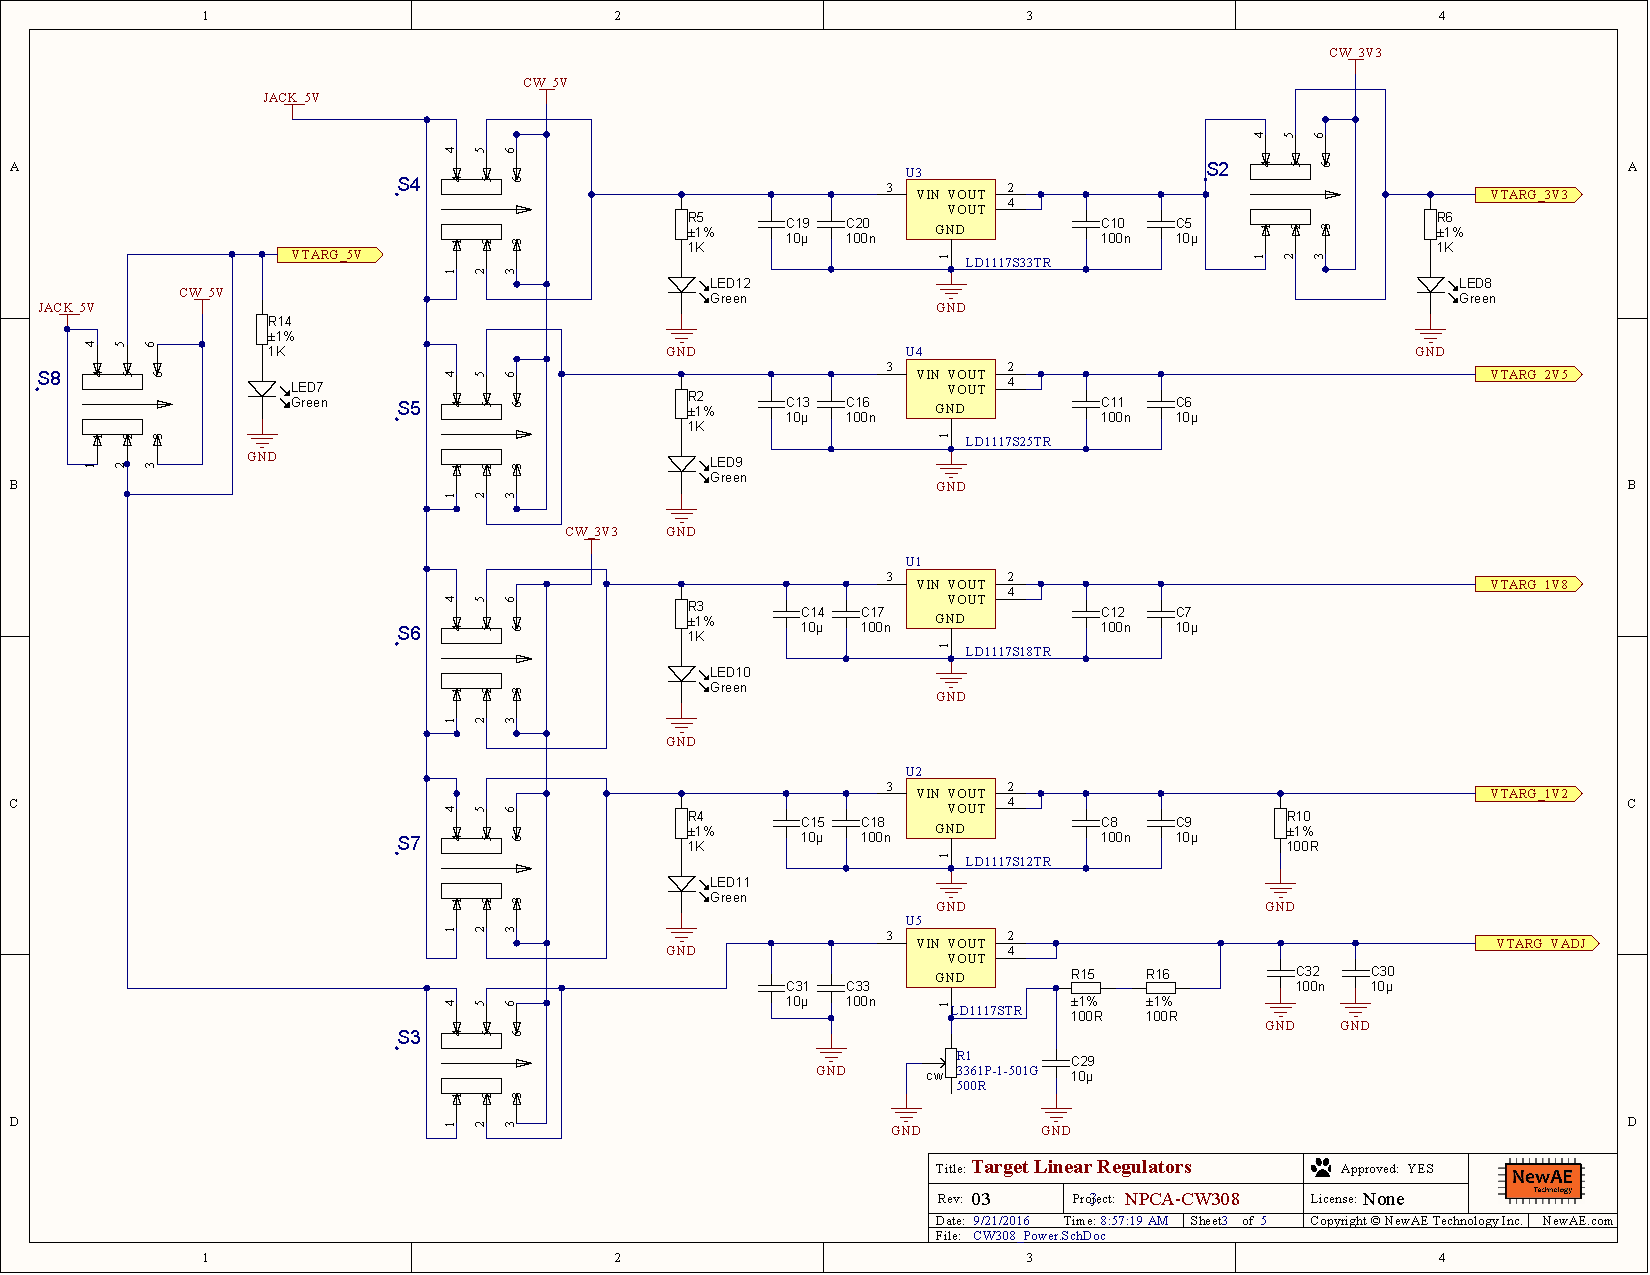 The following has a copy of schematic pages in image as well. 